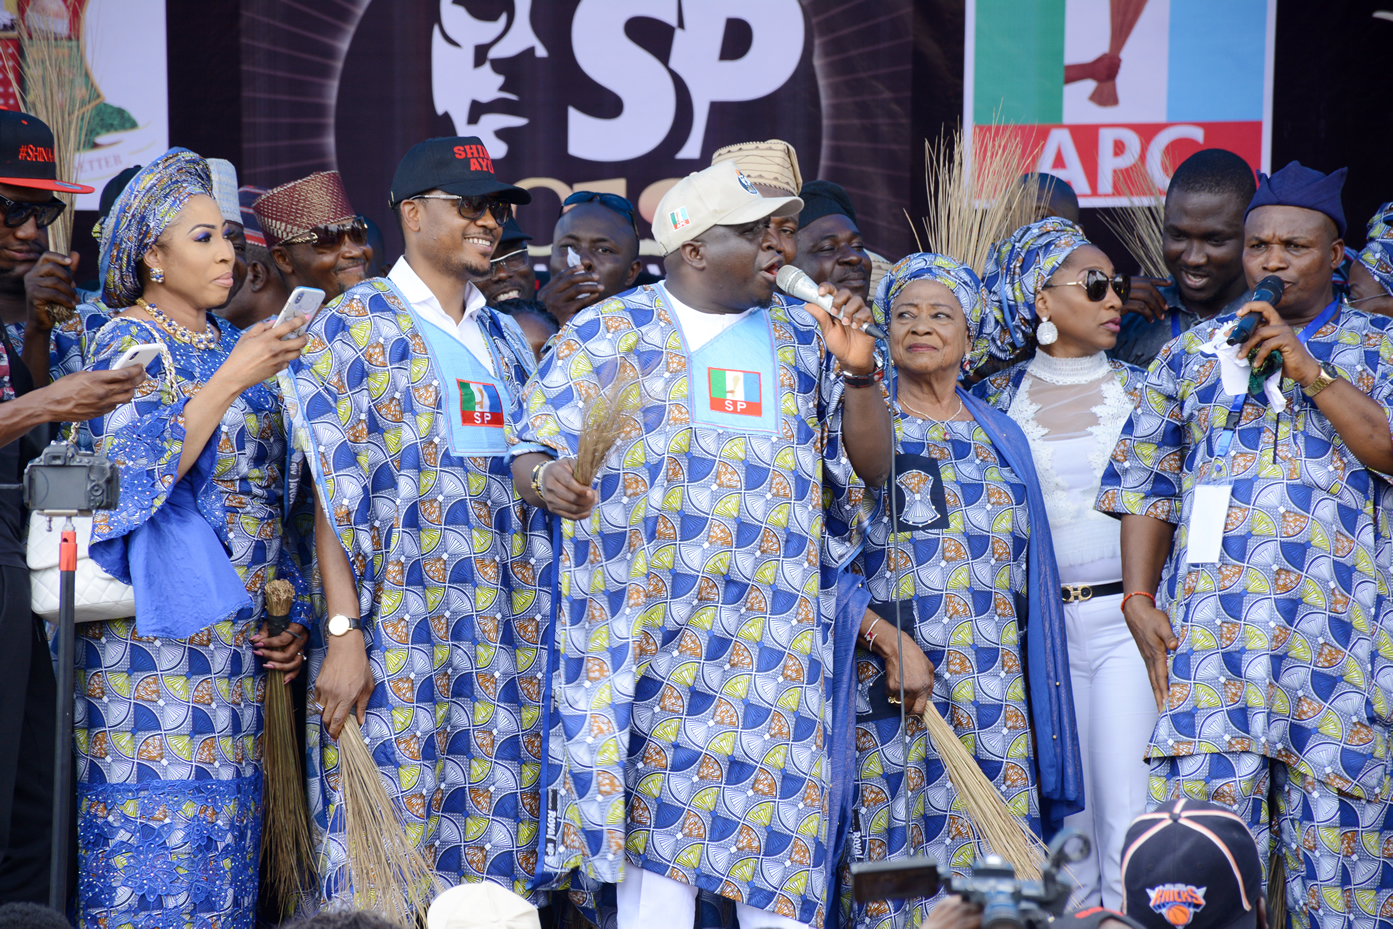 “Oyo APC Is United And Stronger Than Ever” – Says Hon. Shina Peller